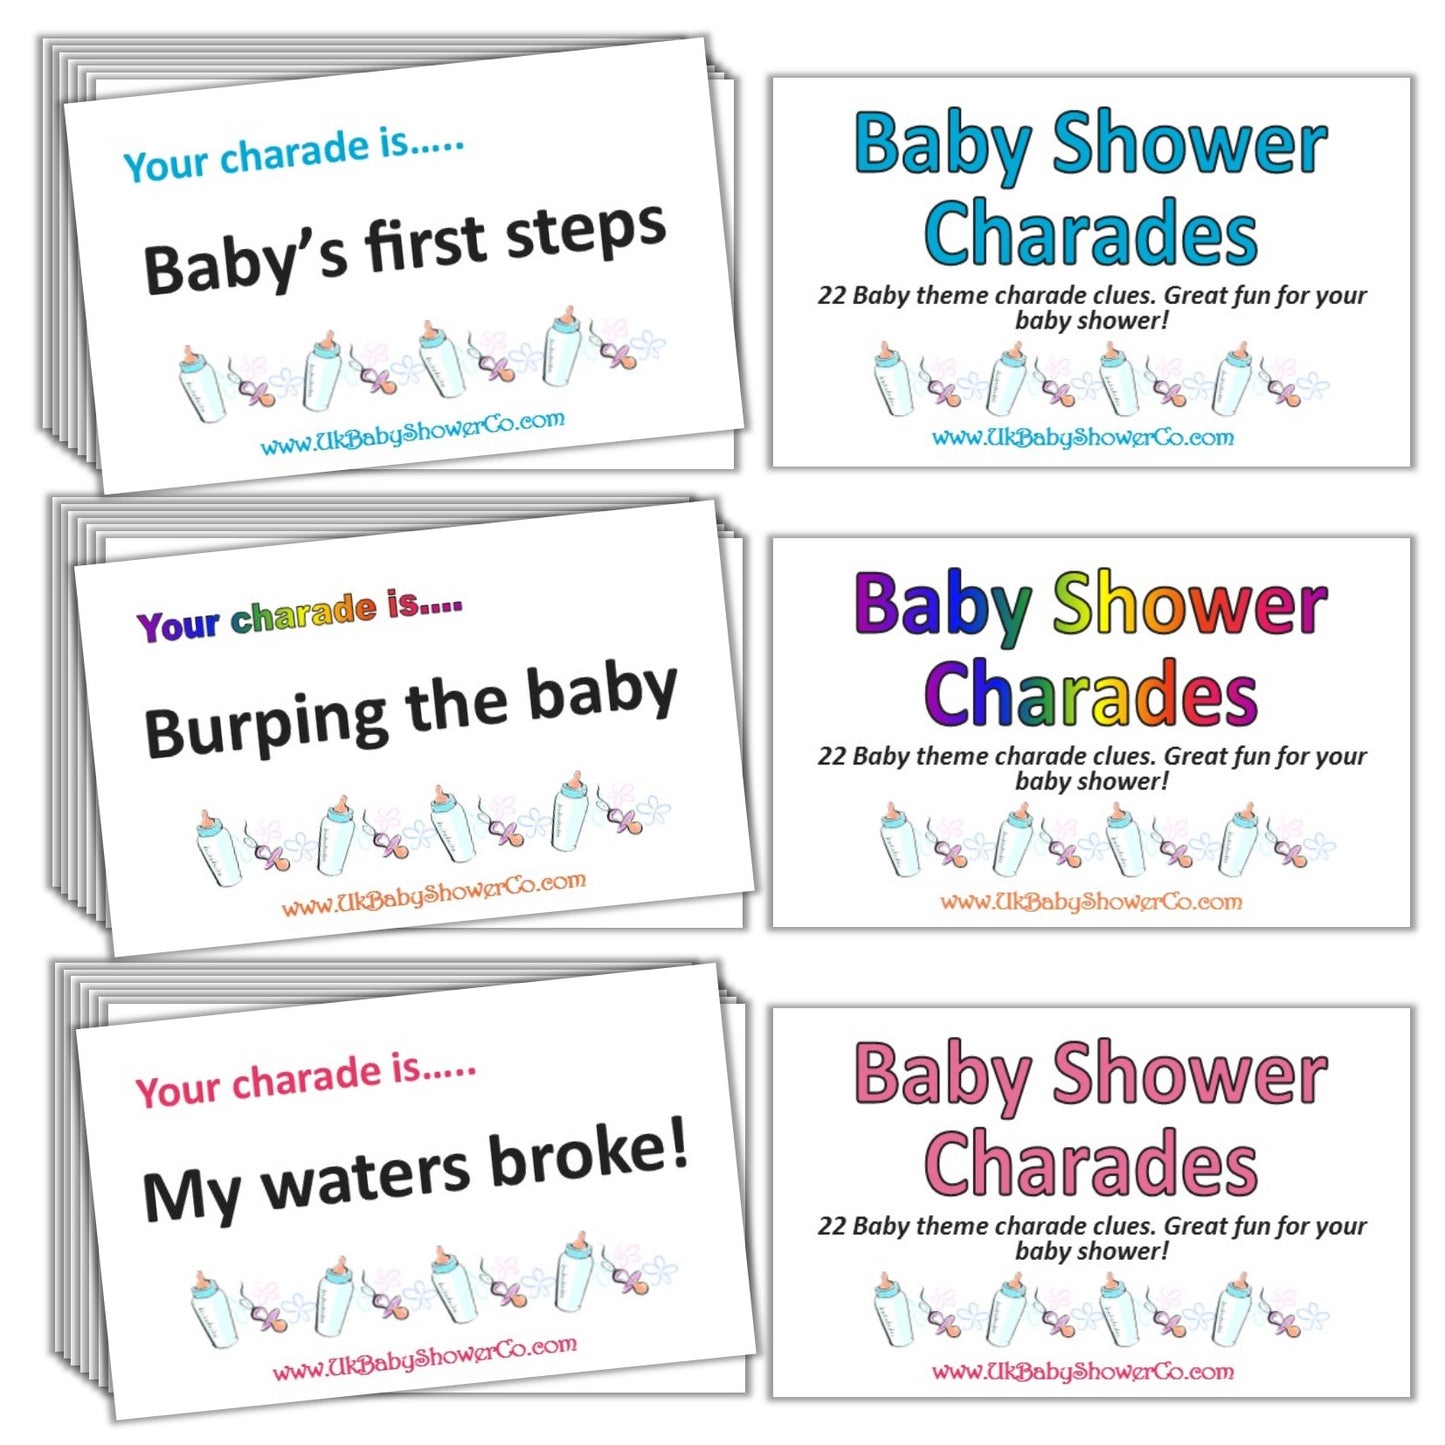 Baby Shower Charades Game - Uk Baby Shower Co ltd